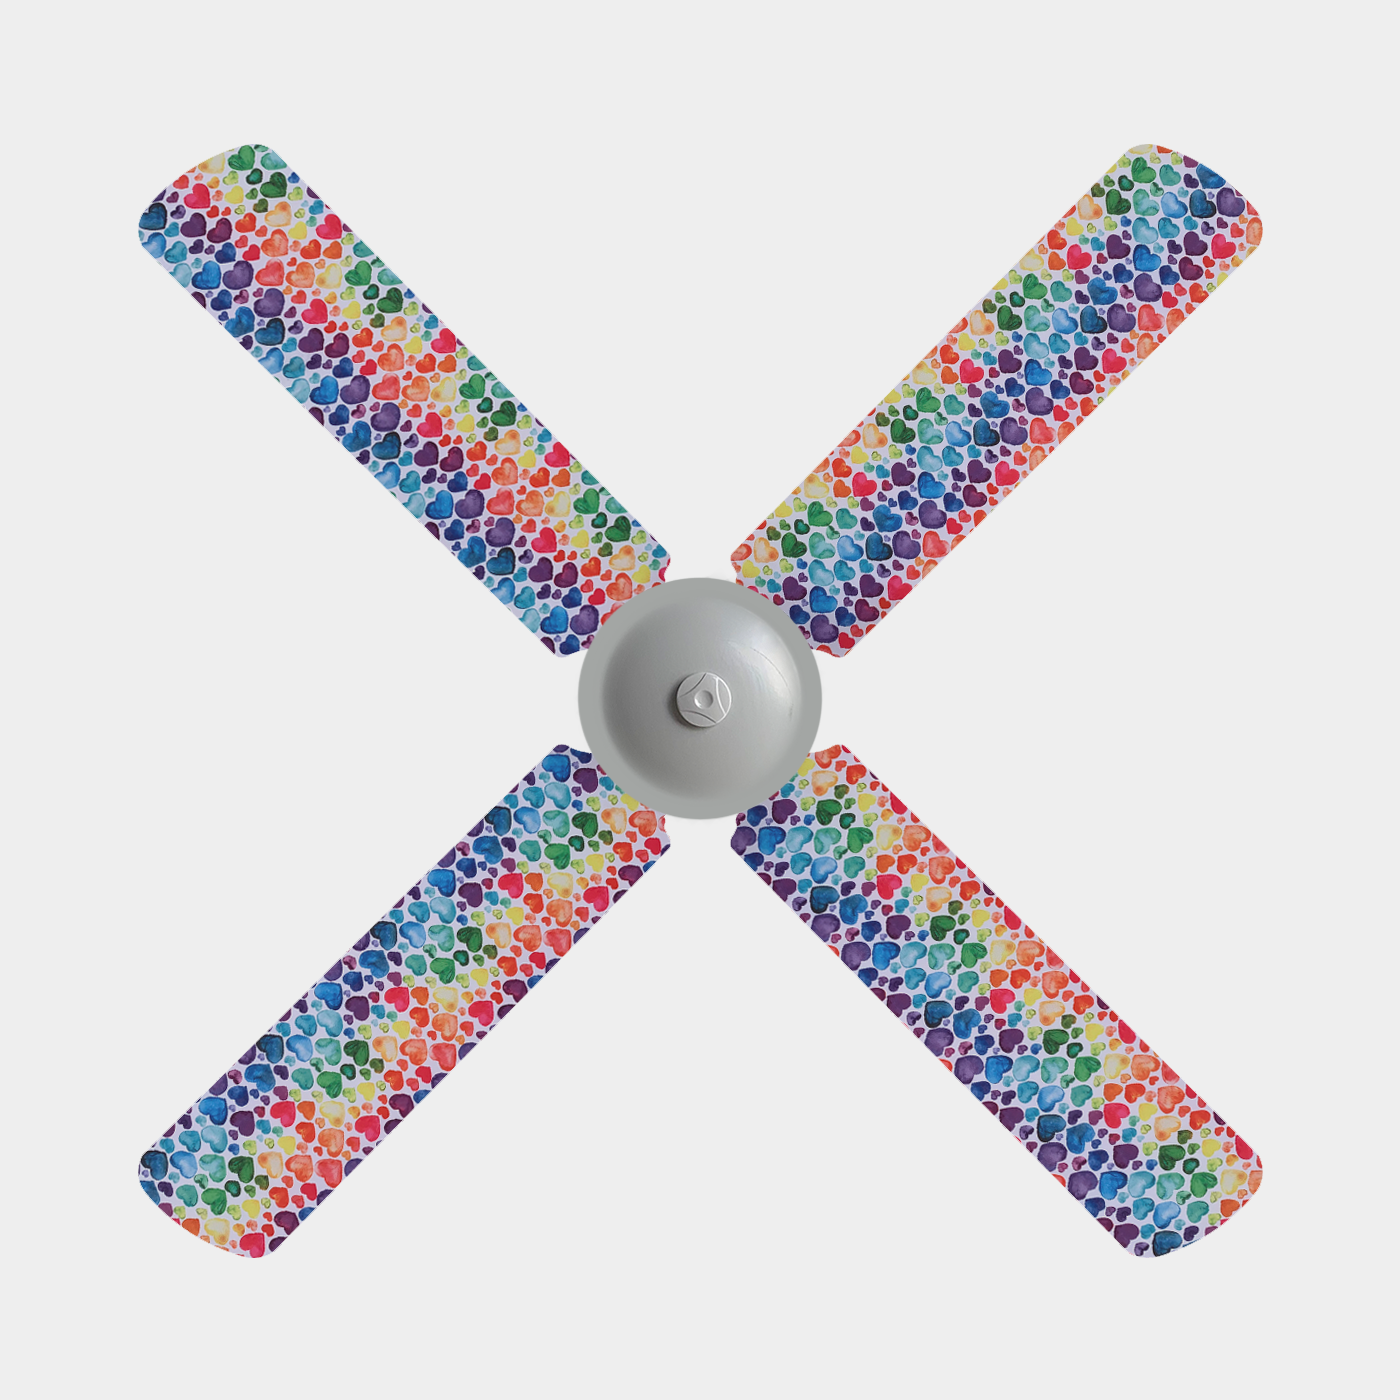 Fan blade covers with white background and blue, purple, red, orange, yellow, and green hearts on a three blade fan